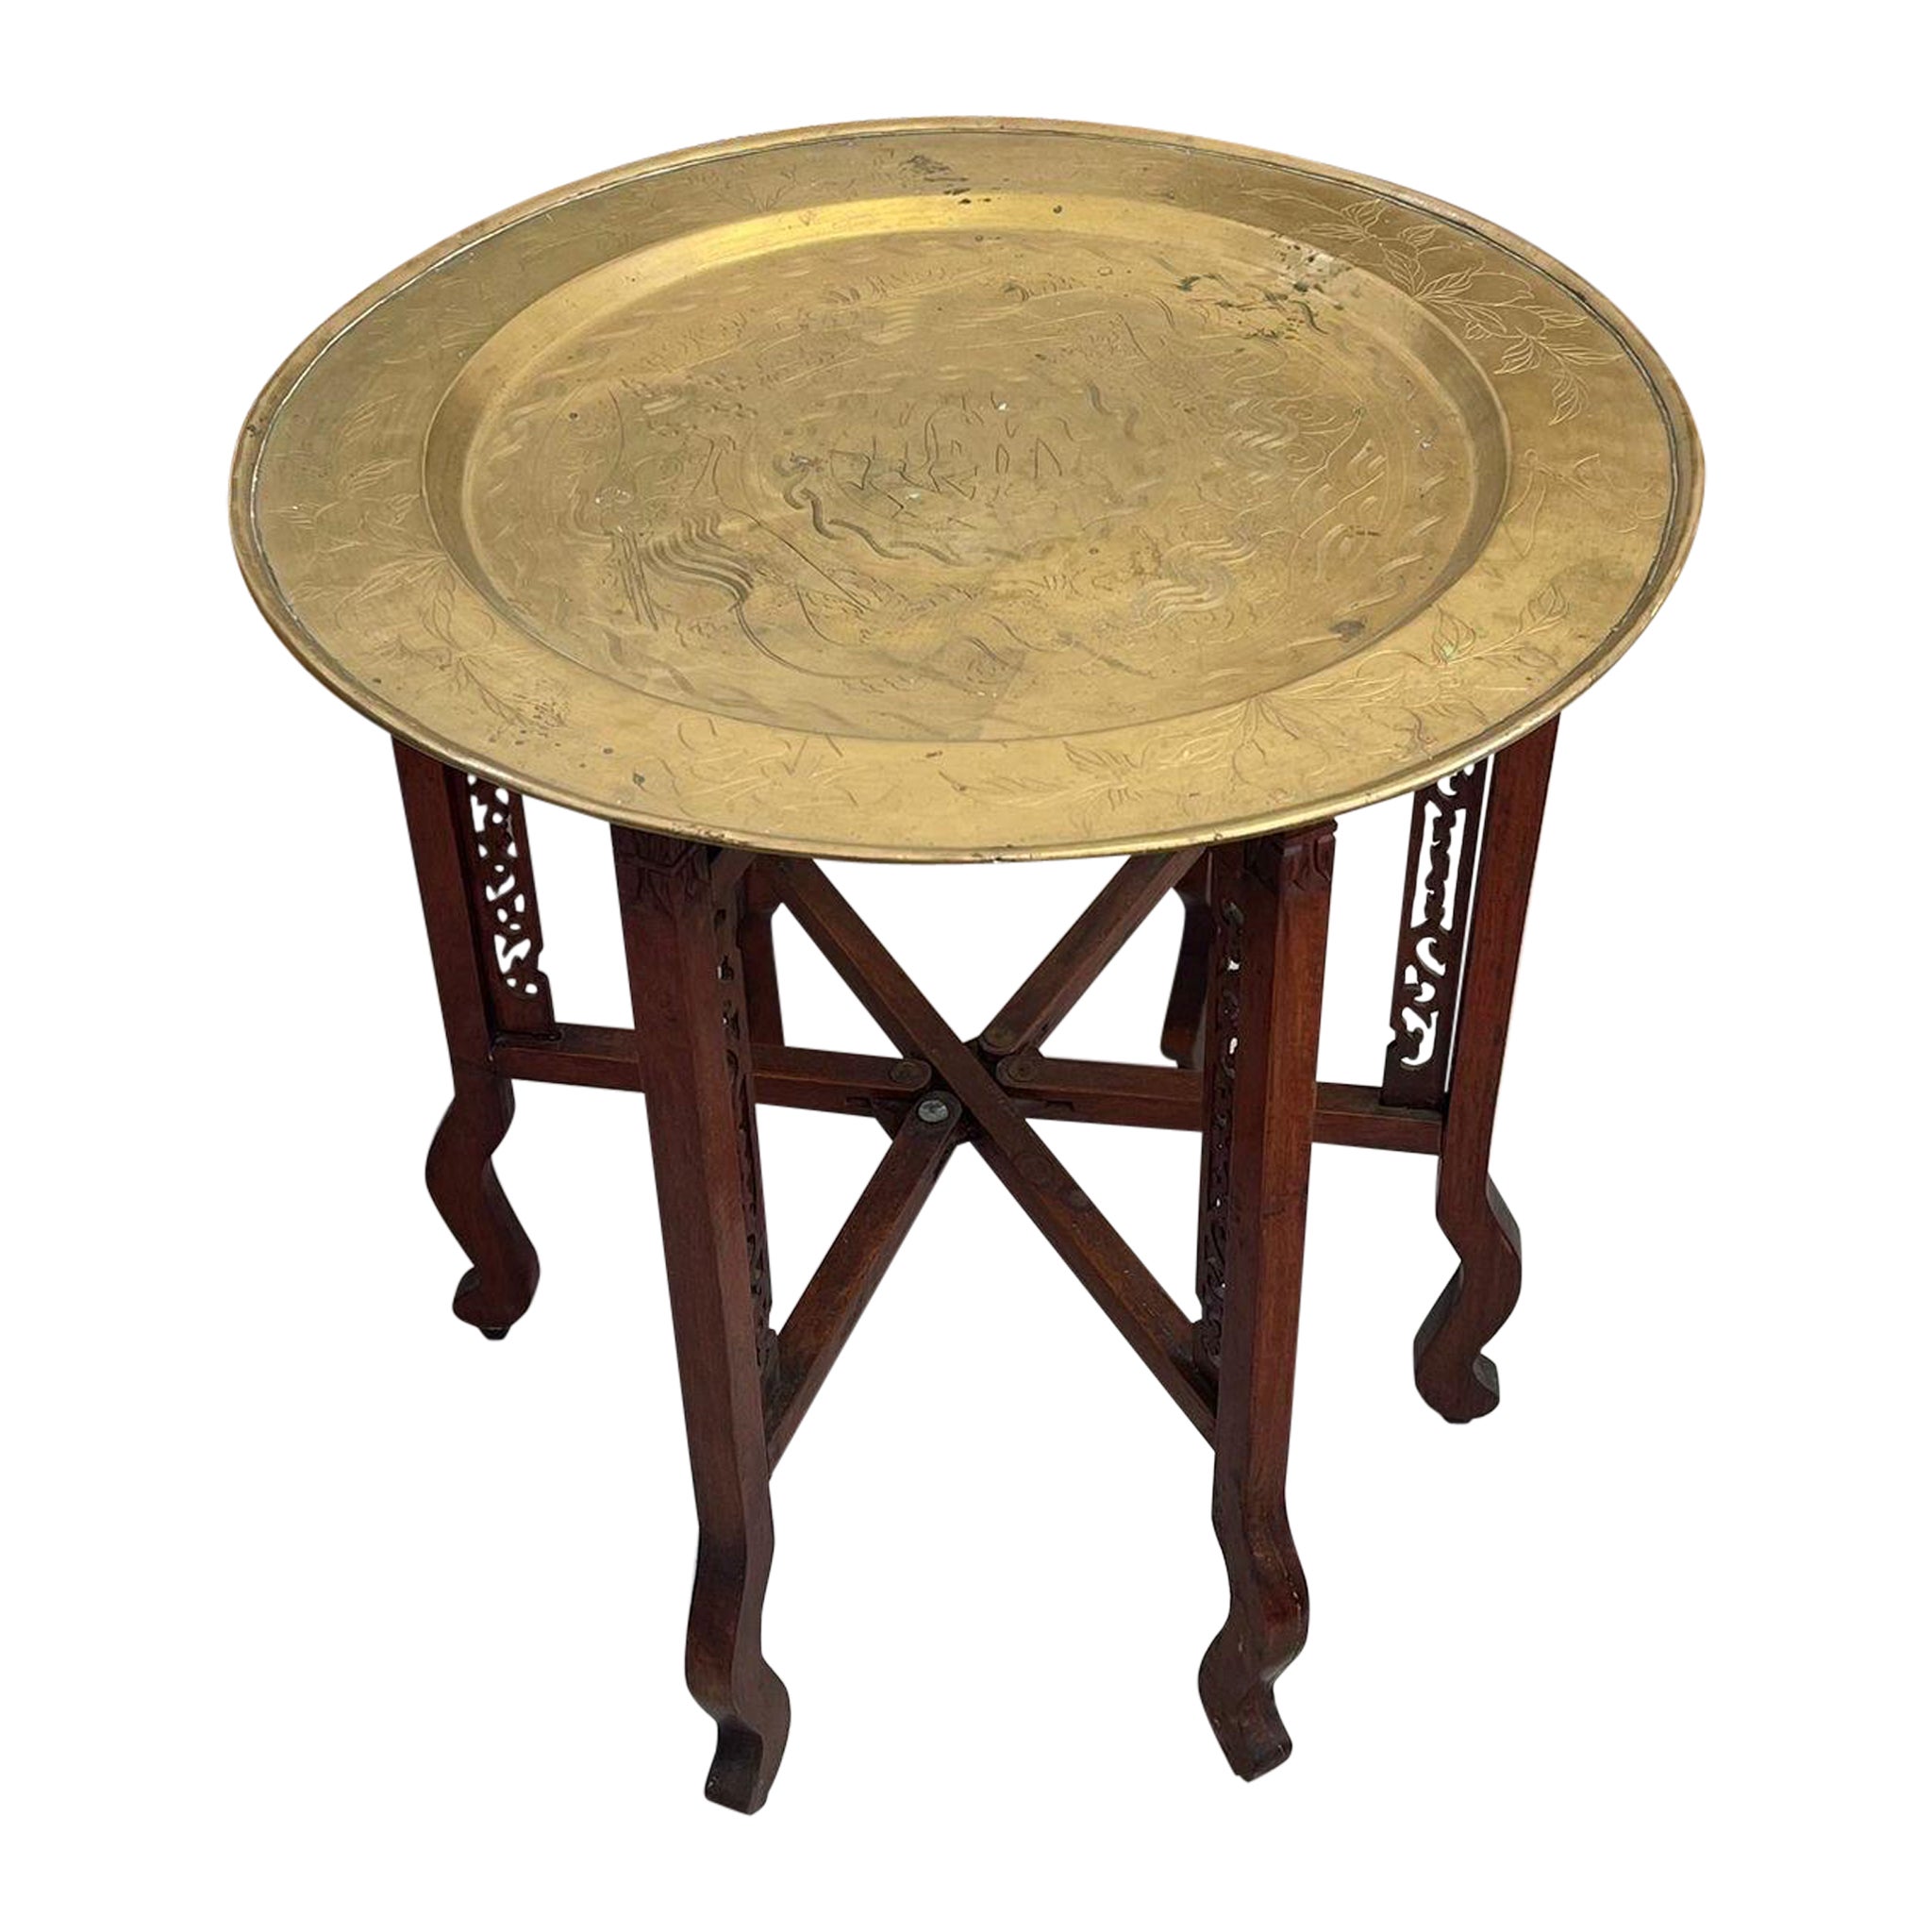 Vintage Brass Top Table With Foldable Base For Sale